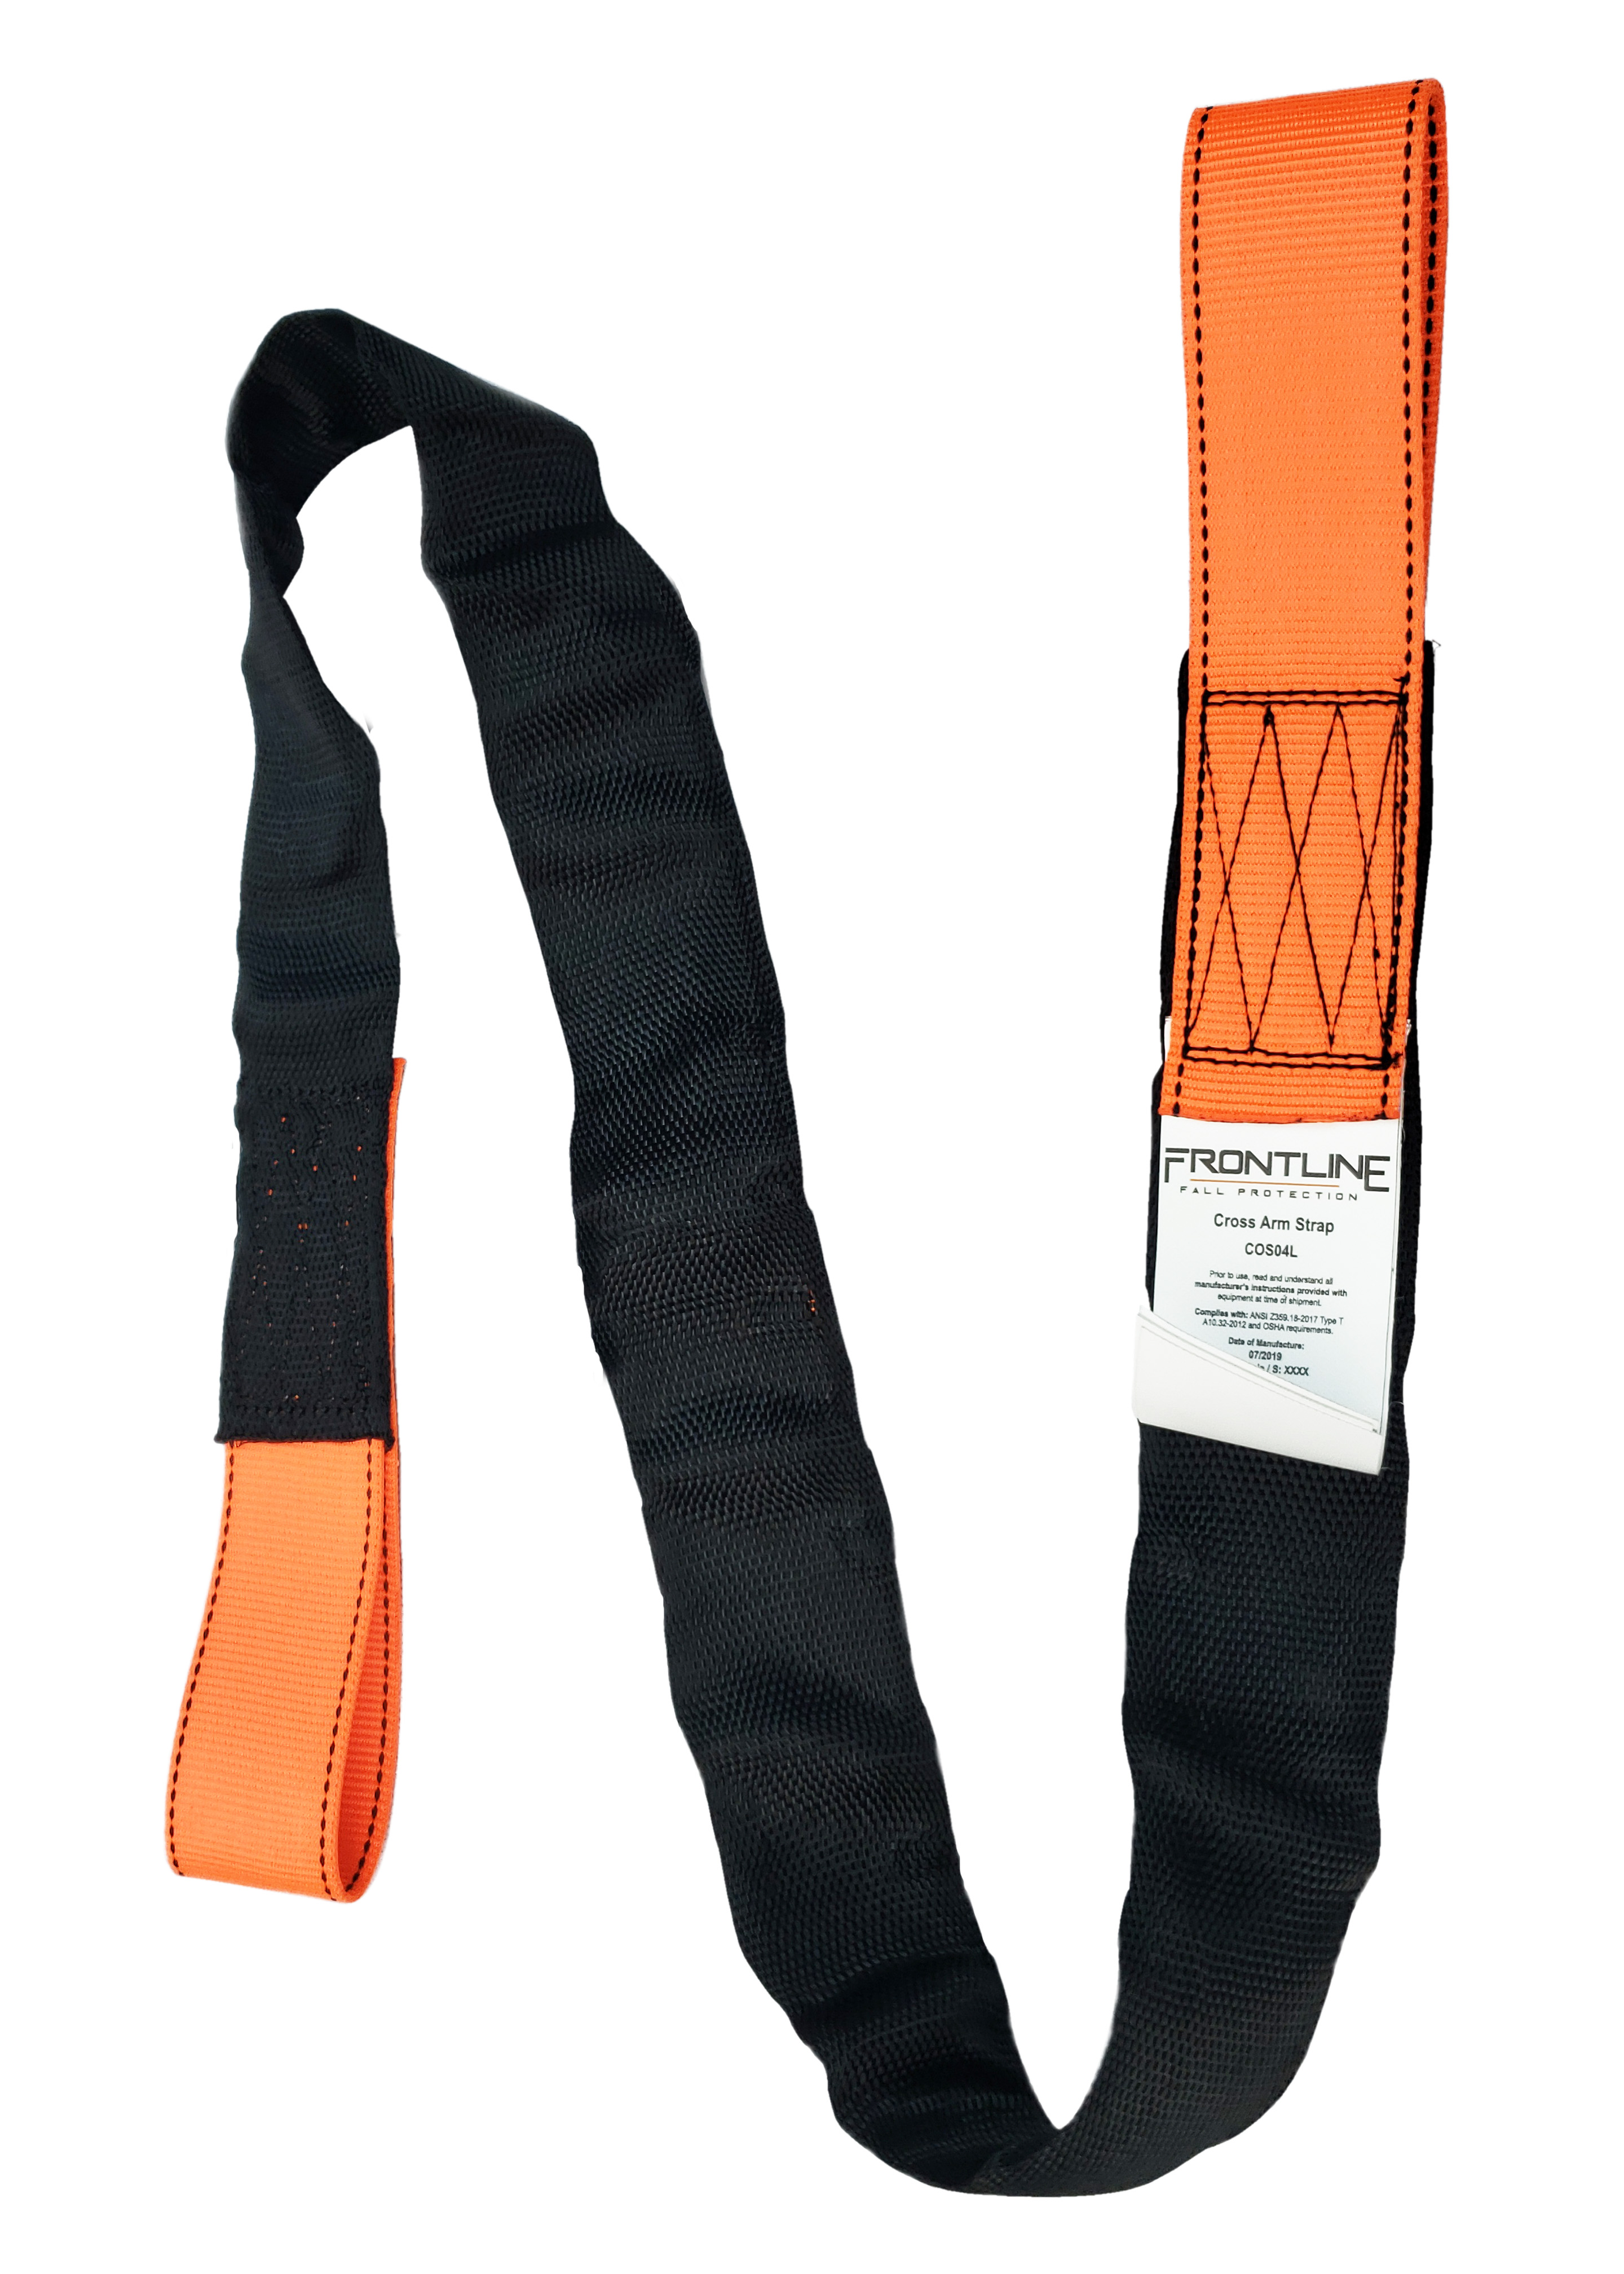 COS04L Concrete Embed Anchor Strap with Looped Ends